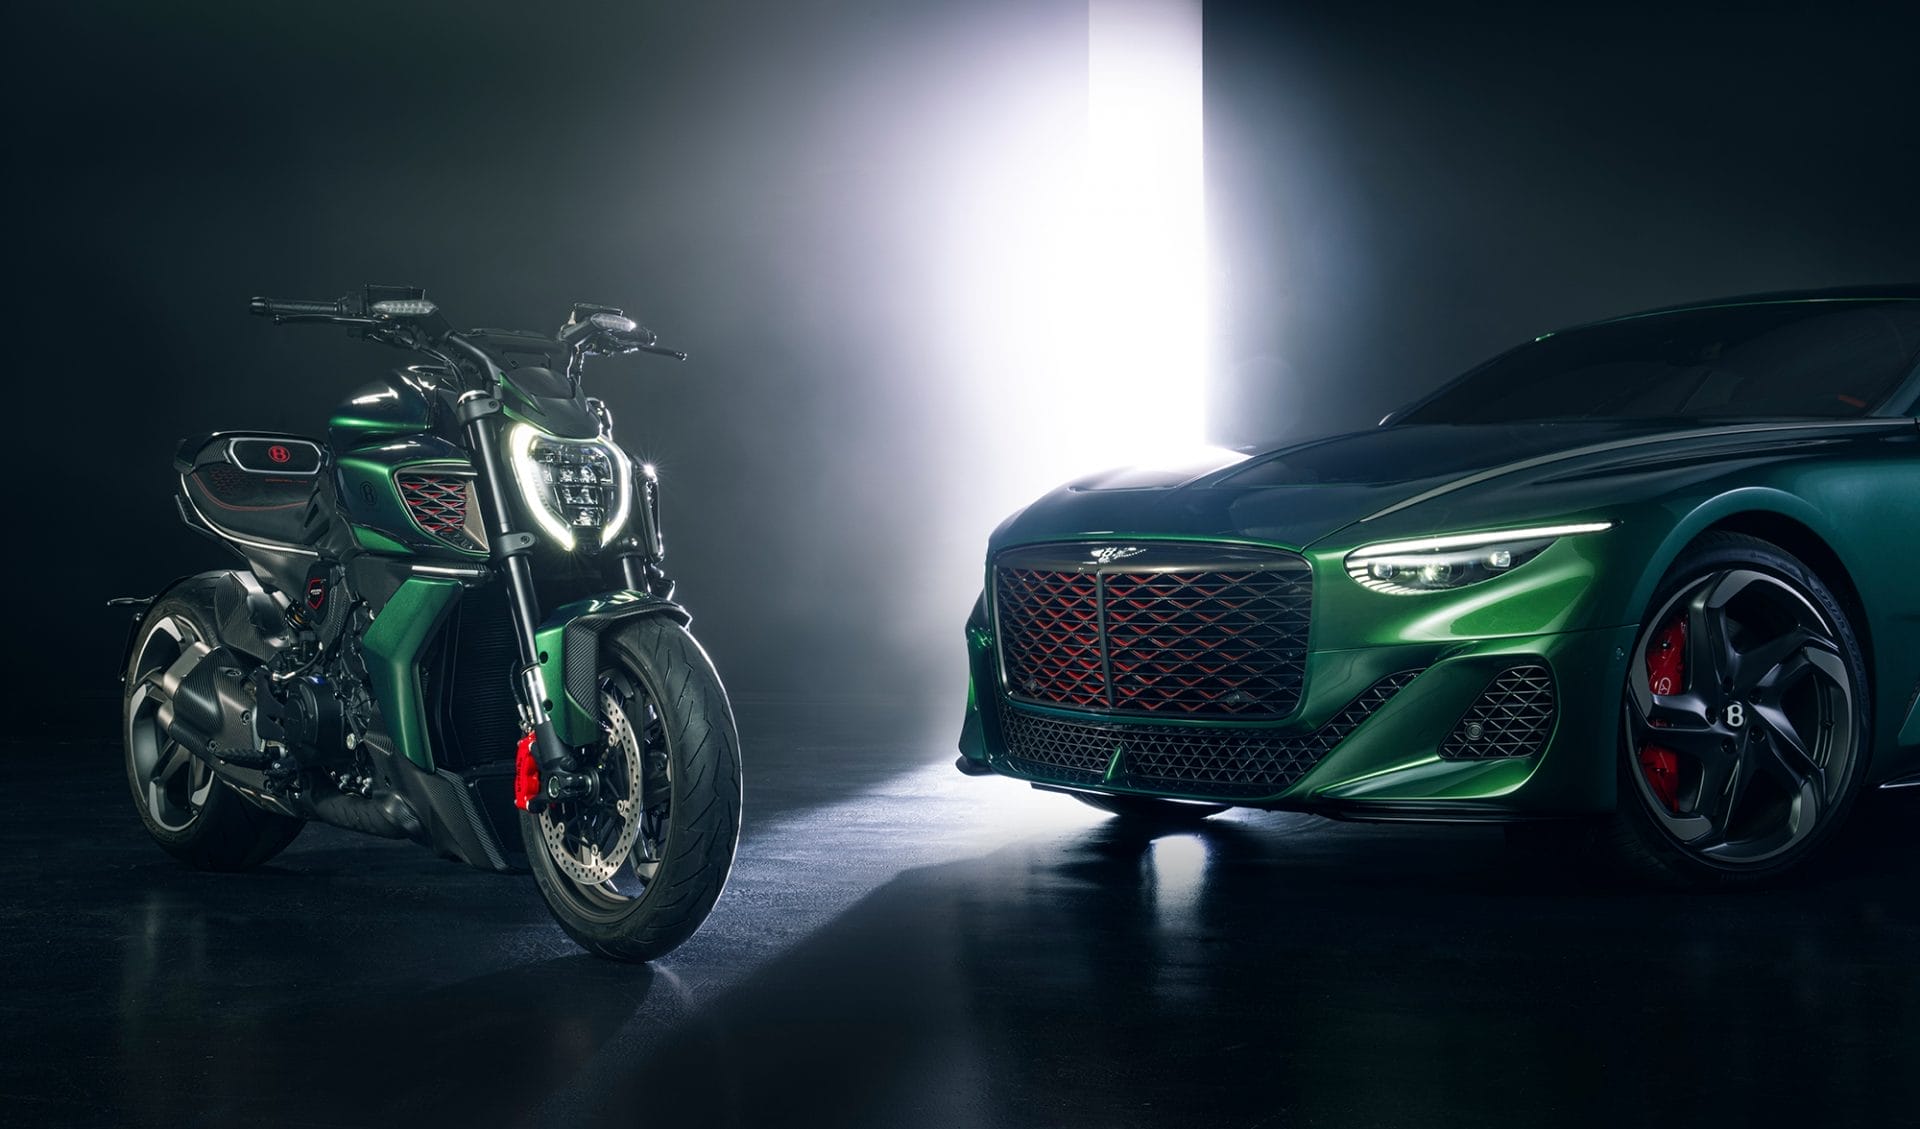 Technical sophistication and design: Ducati Diavel meets Bentley